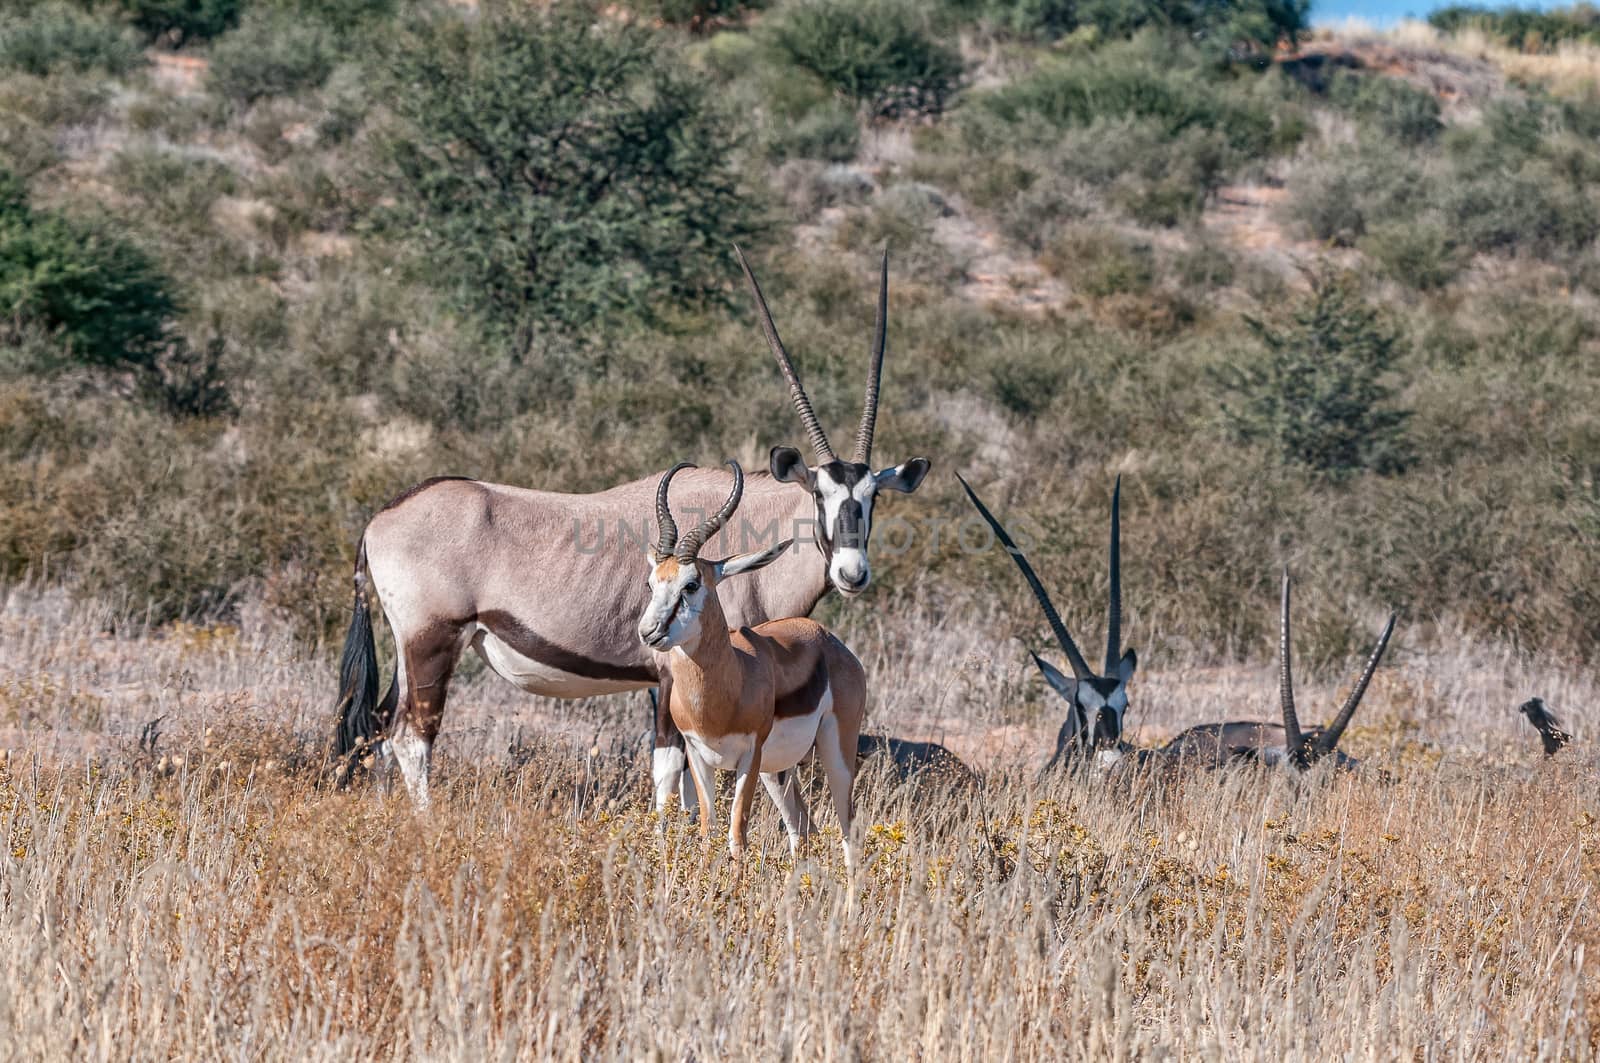 Oryx and a springbok between grass in the Kgalagadi by dpreezg